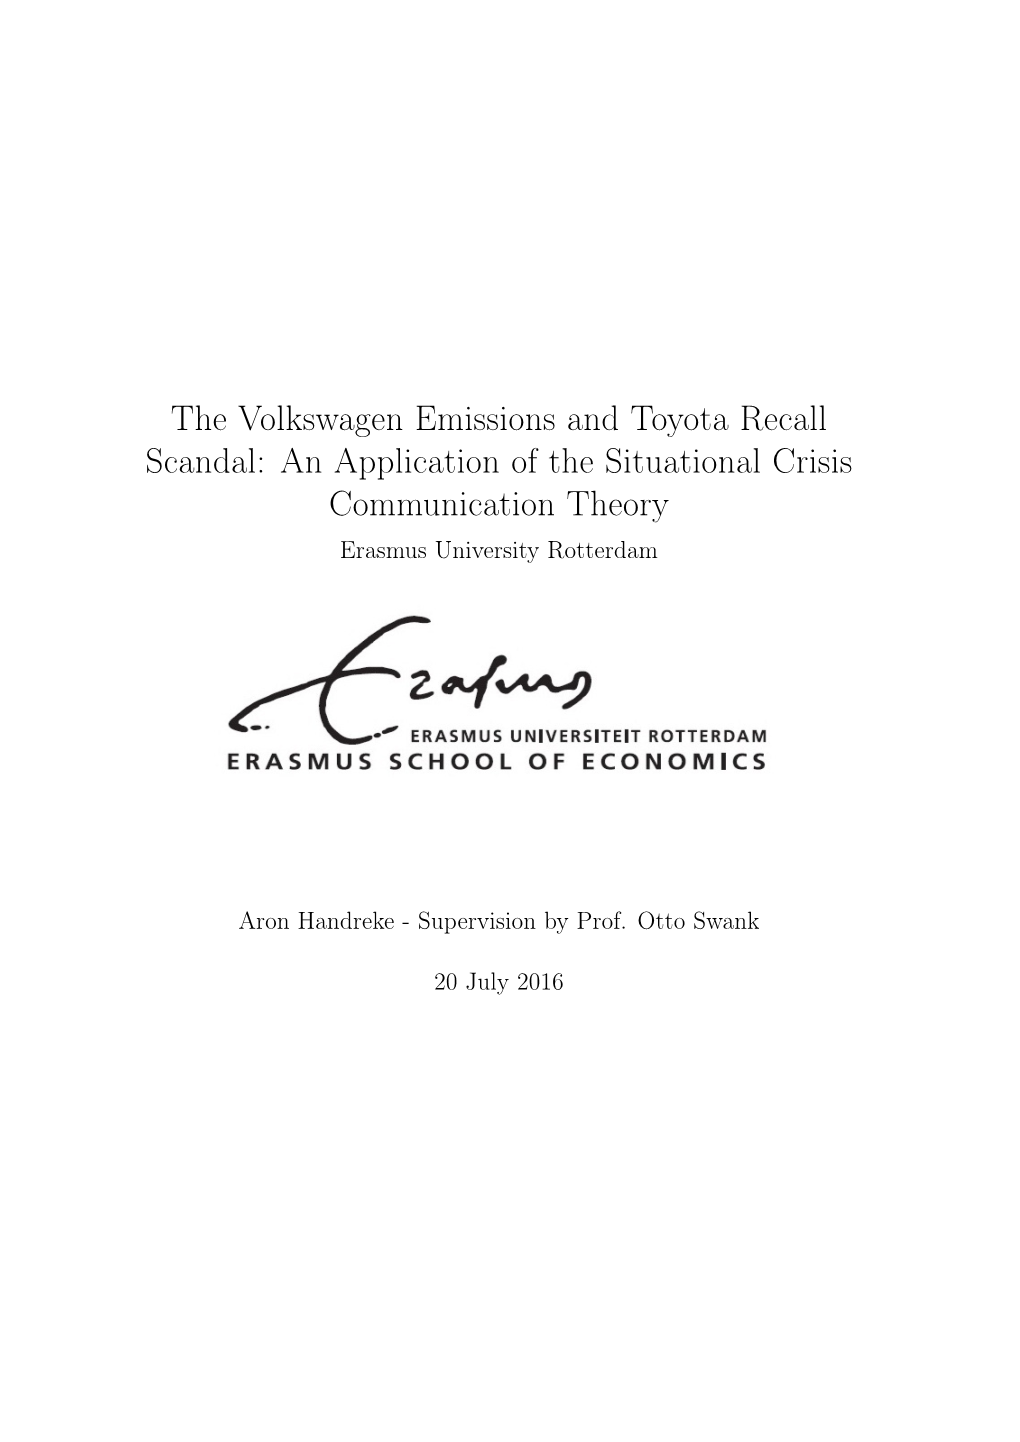 The Volkswagen Emissions and Toyota Recall Scandal: an Application of the Situational Crisis Communication Theory Erasmus University Rotterdam